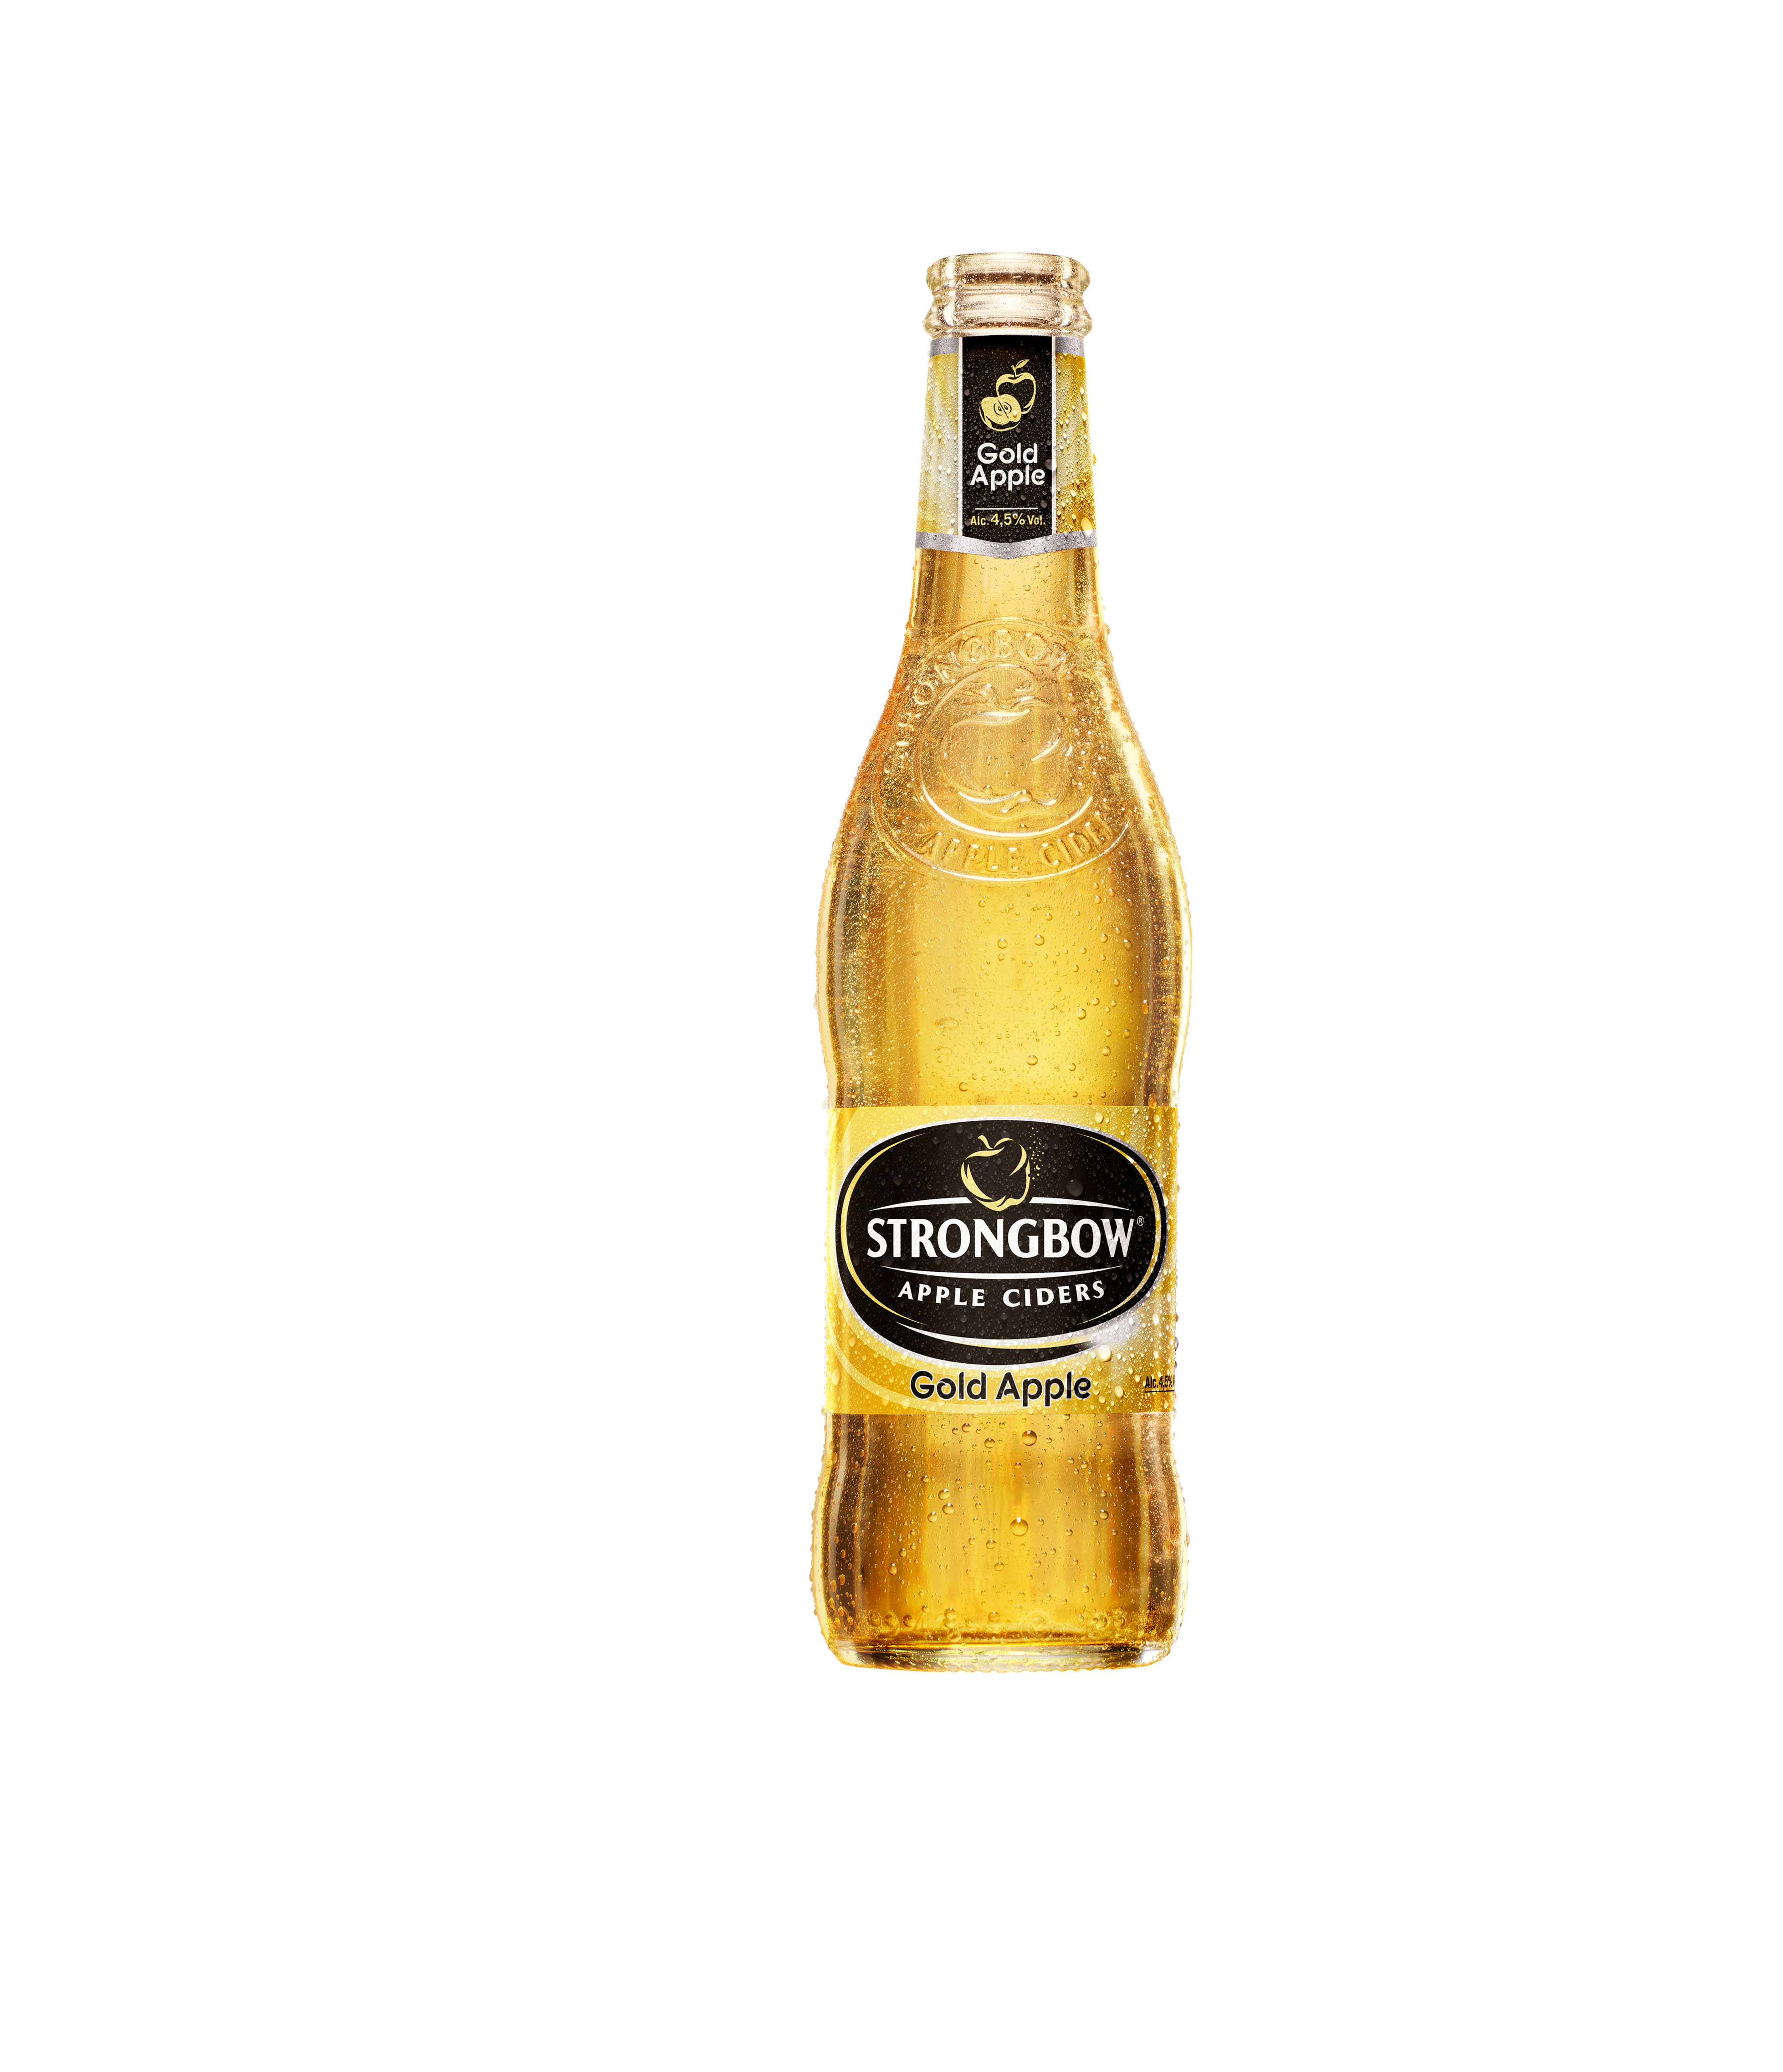 Strongbow Gold Apple Bottle (Old Label) Hero Product Image 3914X4549px